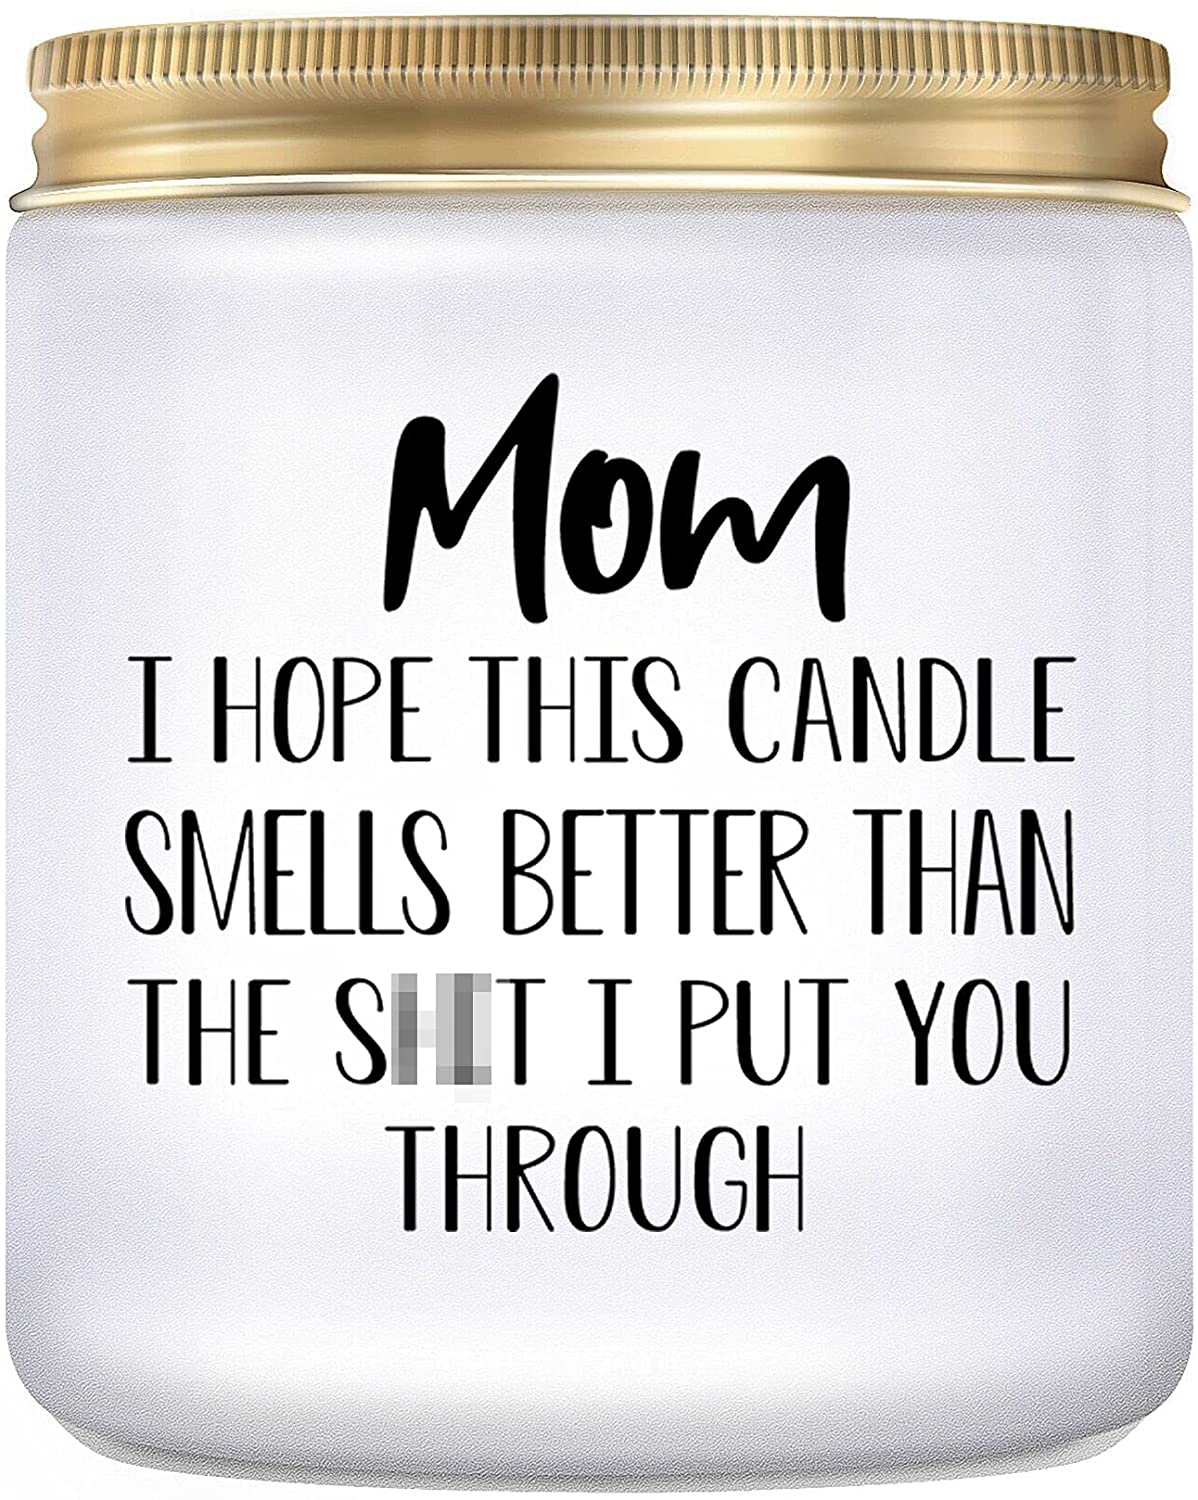 34 Cryworthy Birthday Gifts for Moms from Daughters Heartfelt Ideas   Dodo Burd